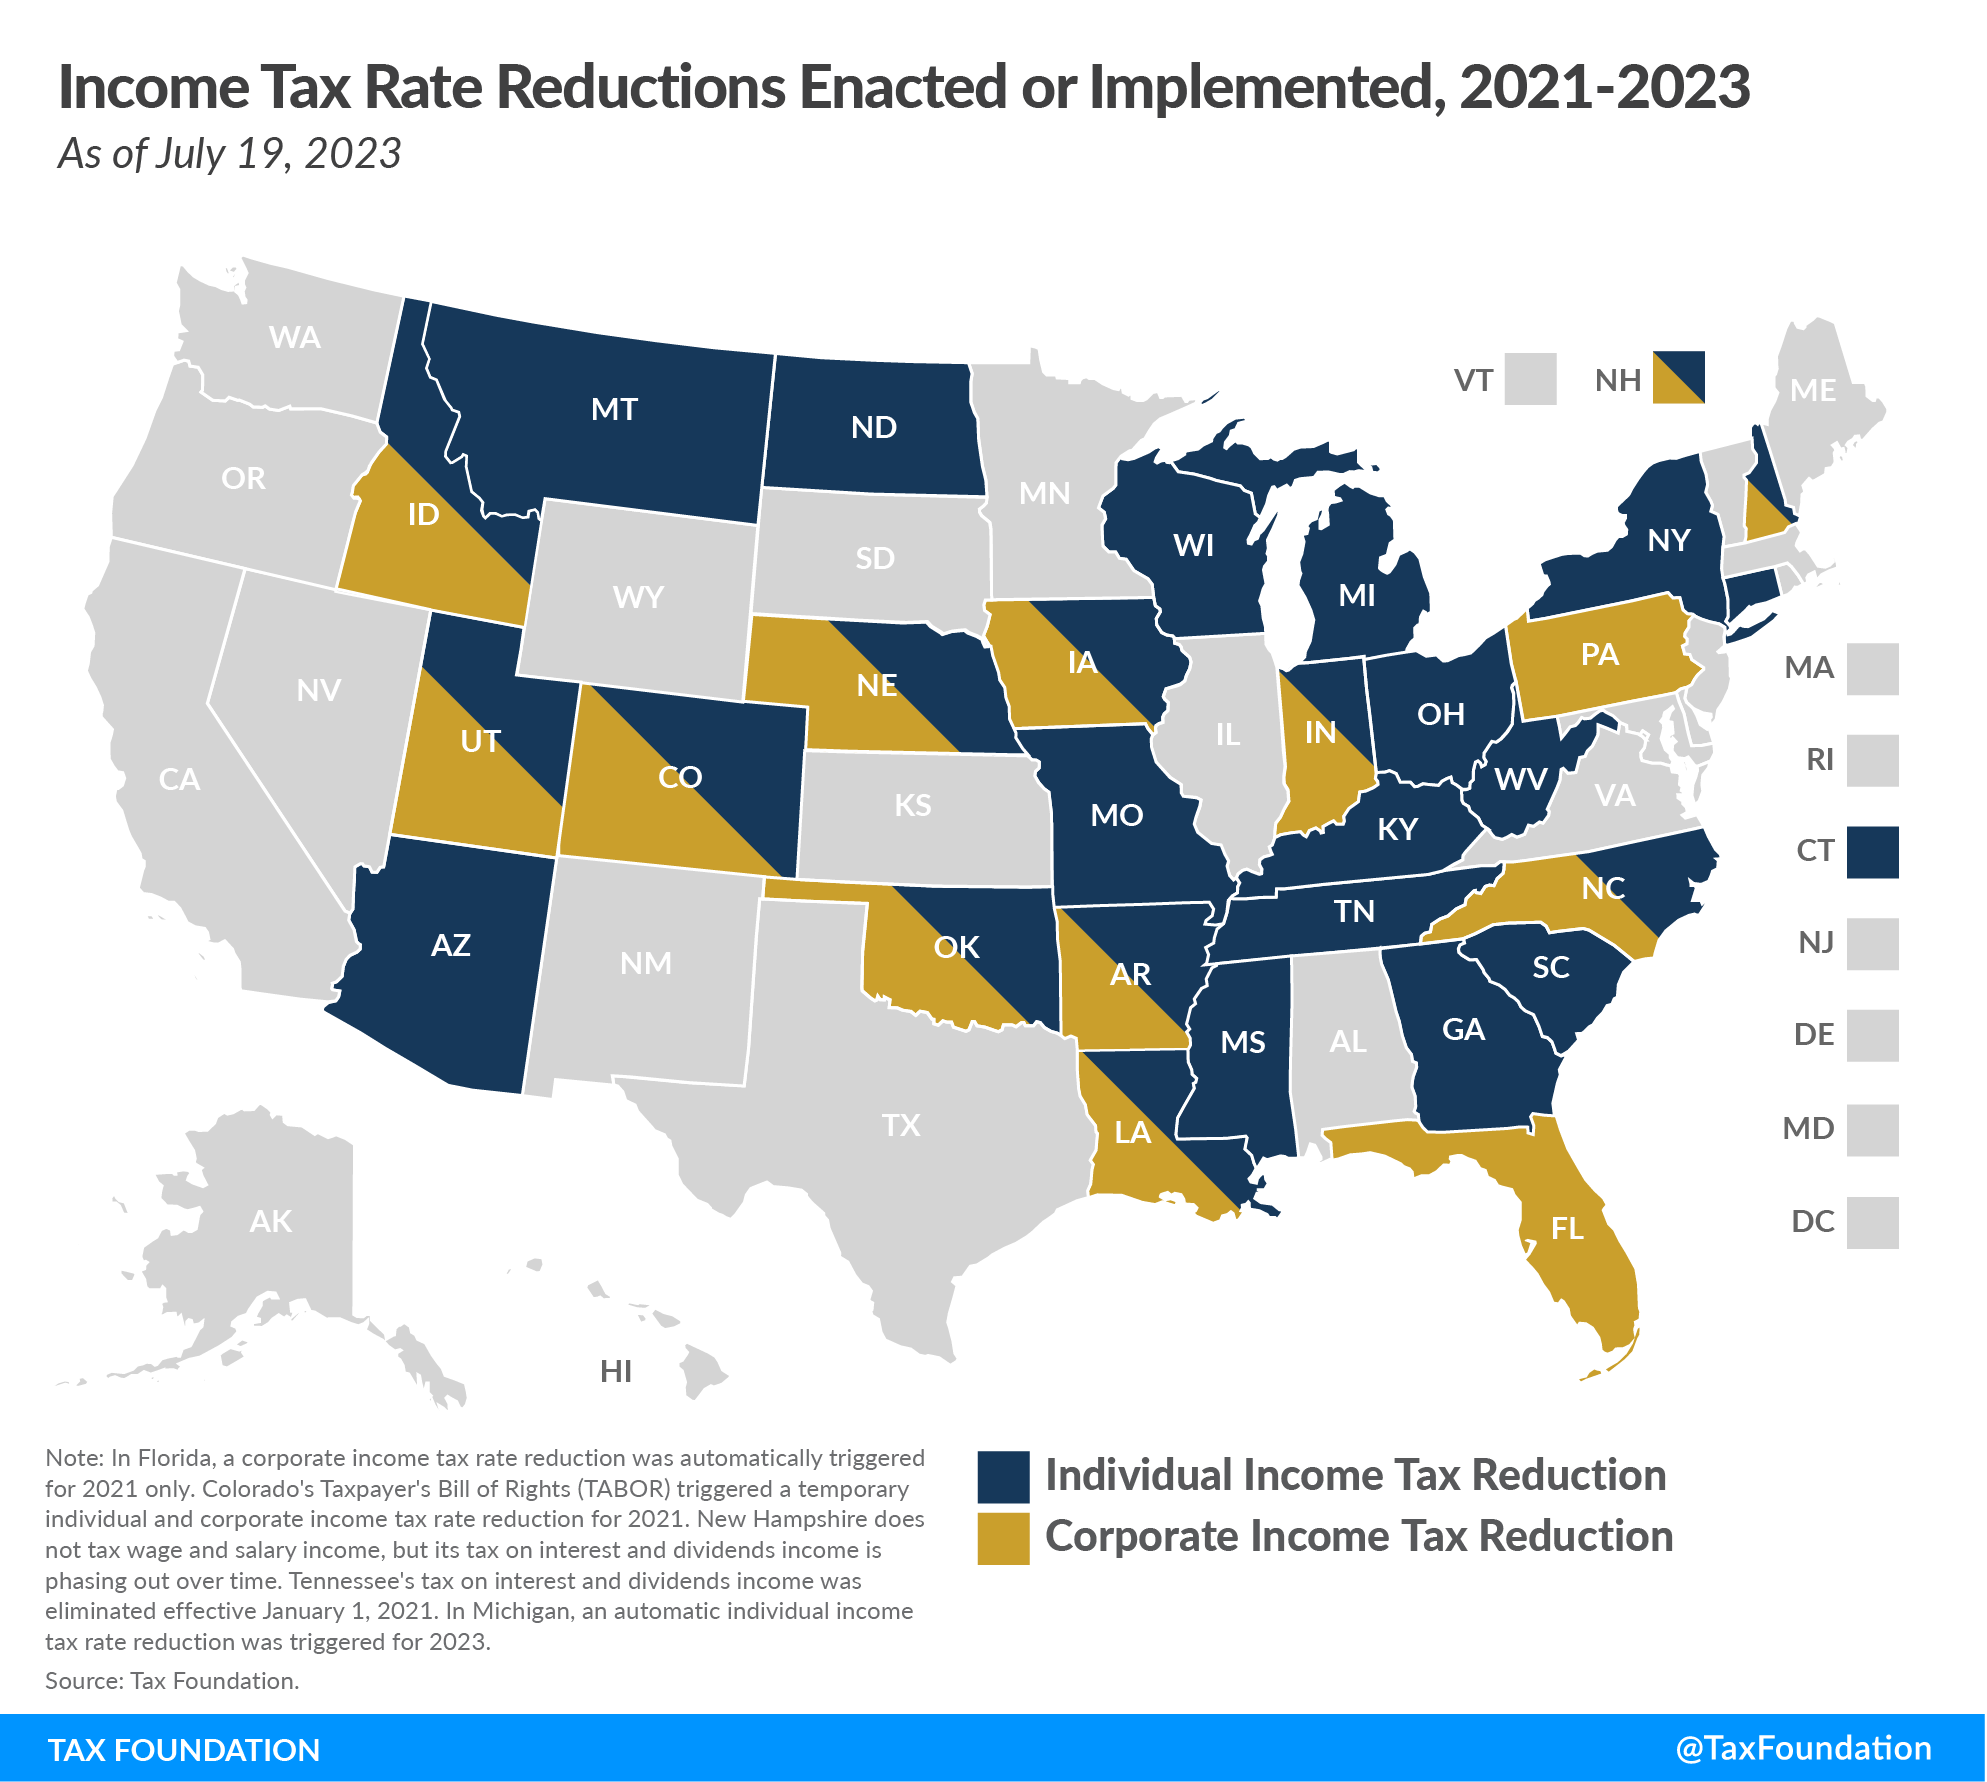 State Income Tax Rate Reductions Enacted or Implemented from 2021 to 2023